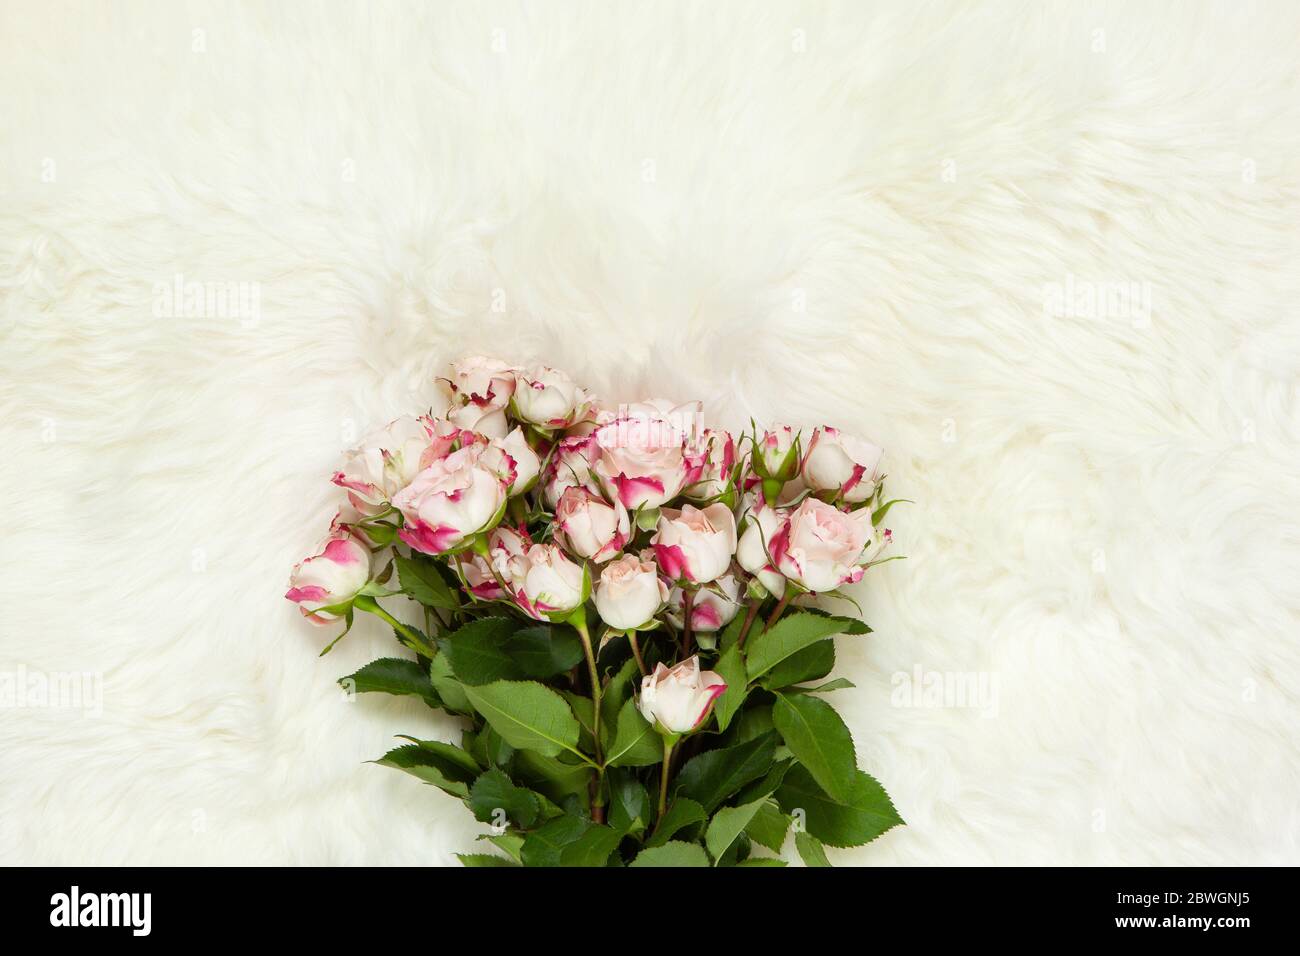 Press Dried Rose Flower Petals on Notebook Page, on White Carpet Fur Stock  Image - Image of note, flora: 83692419